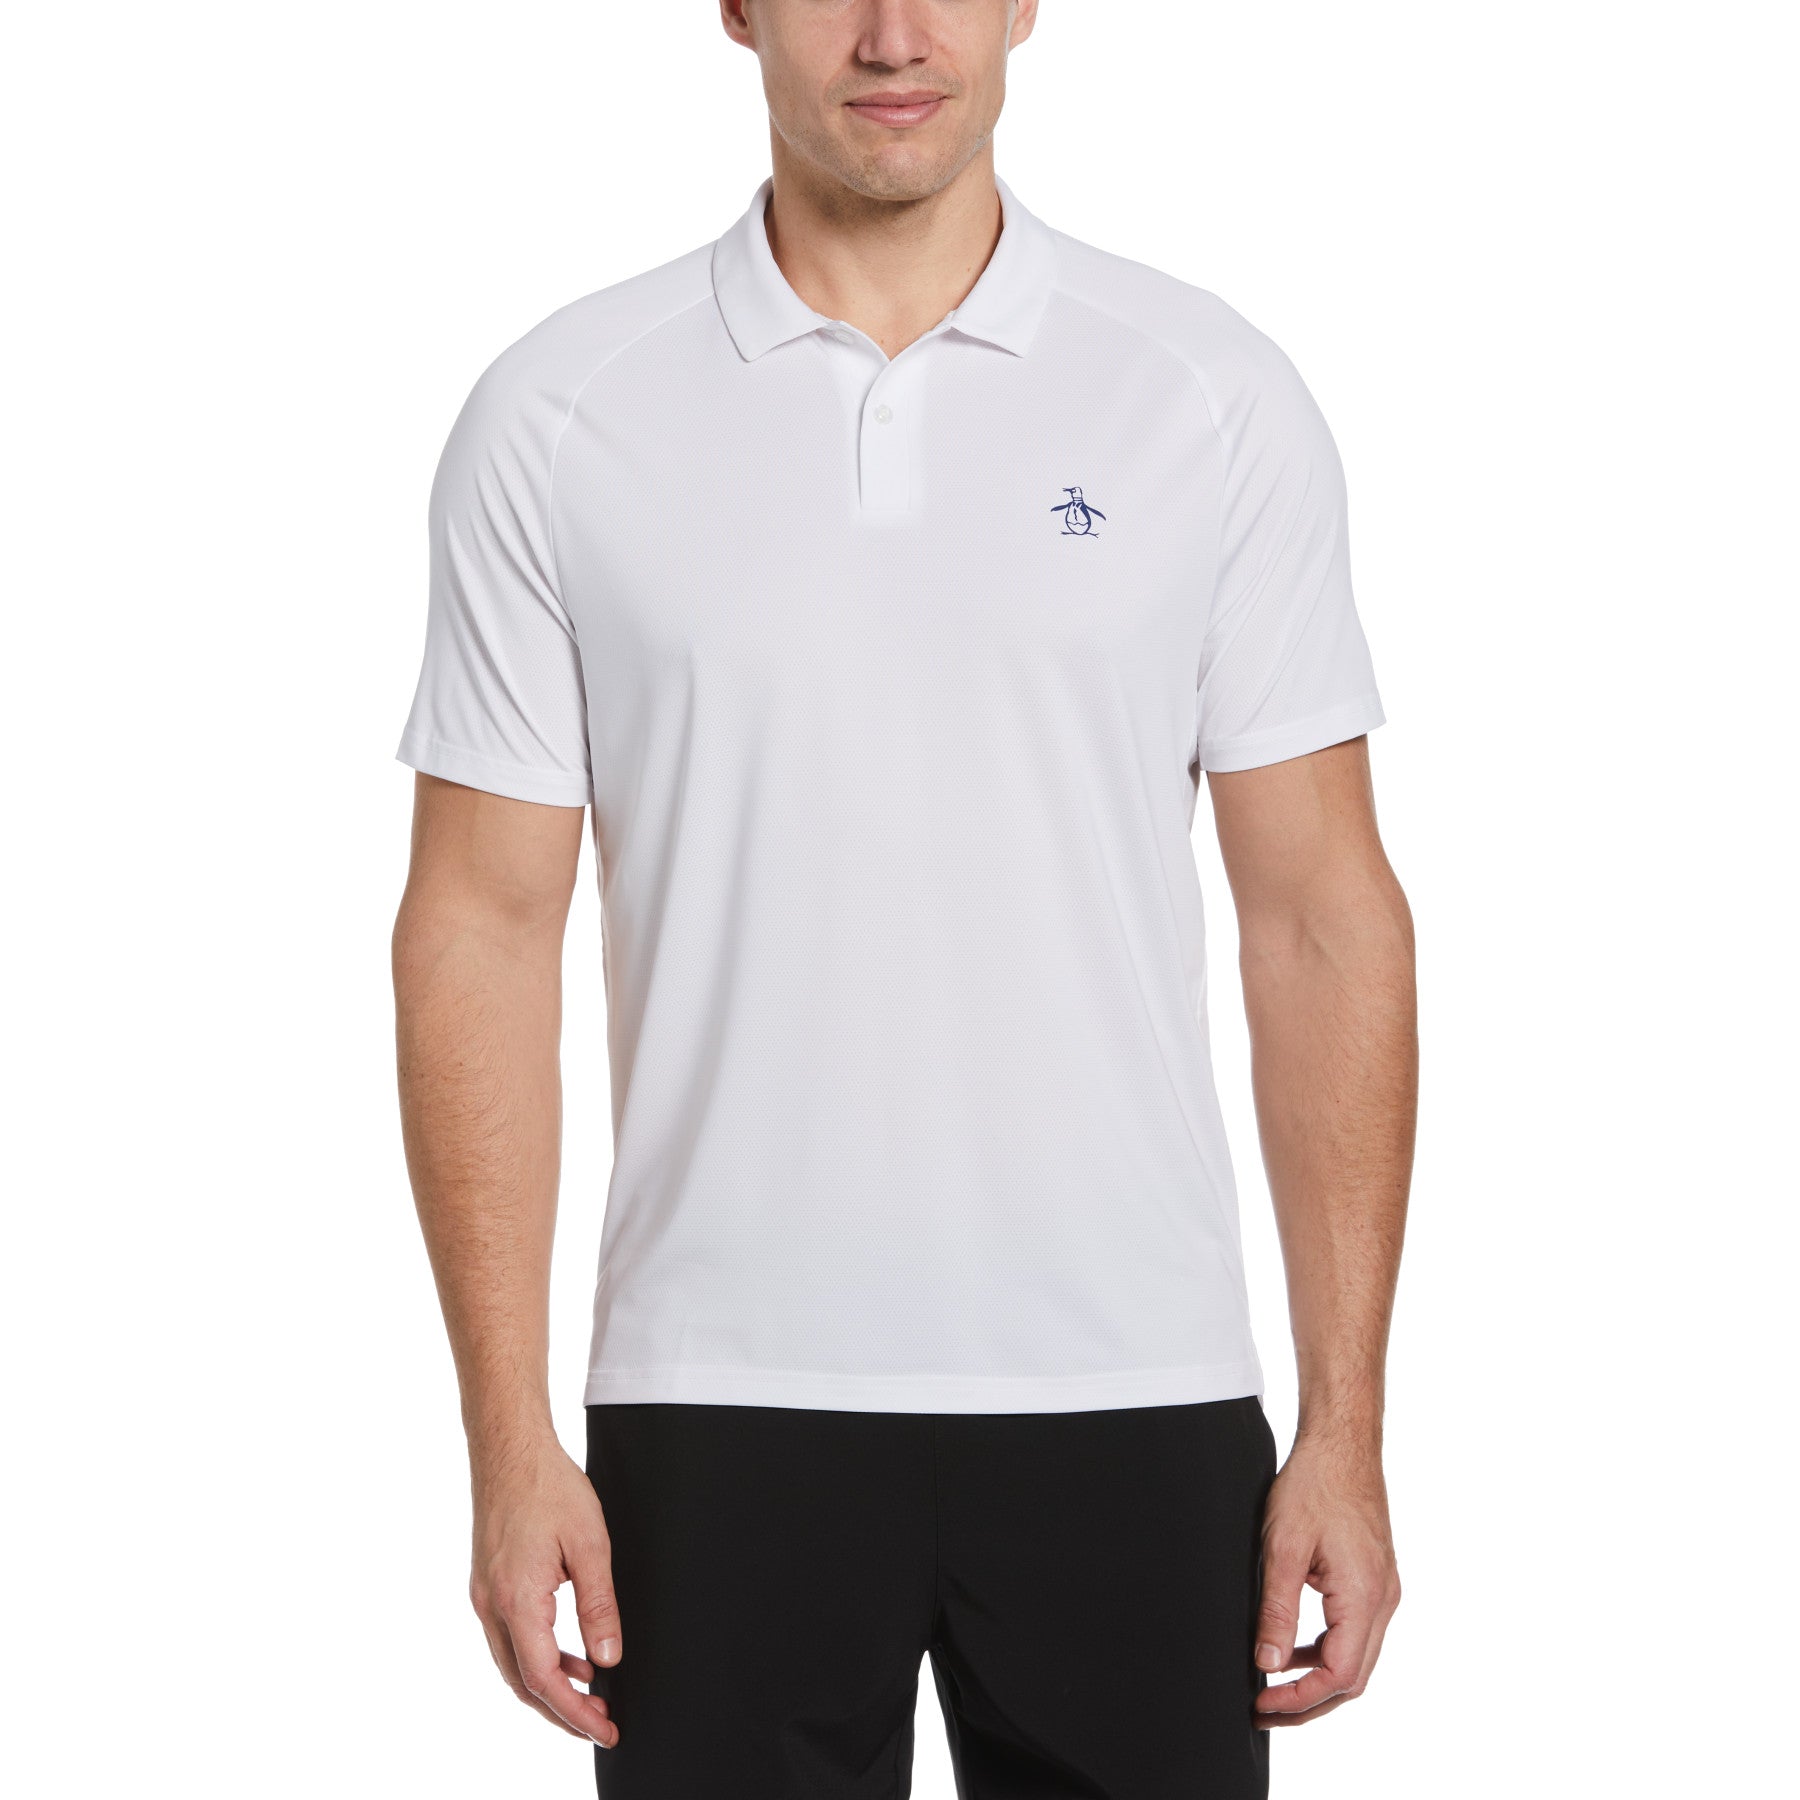 View Legacy Performance Tennis Polo Shirt In Bright White information